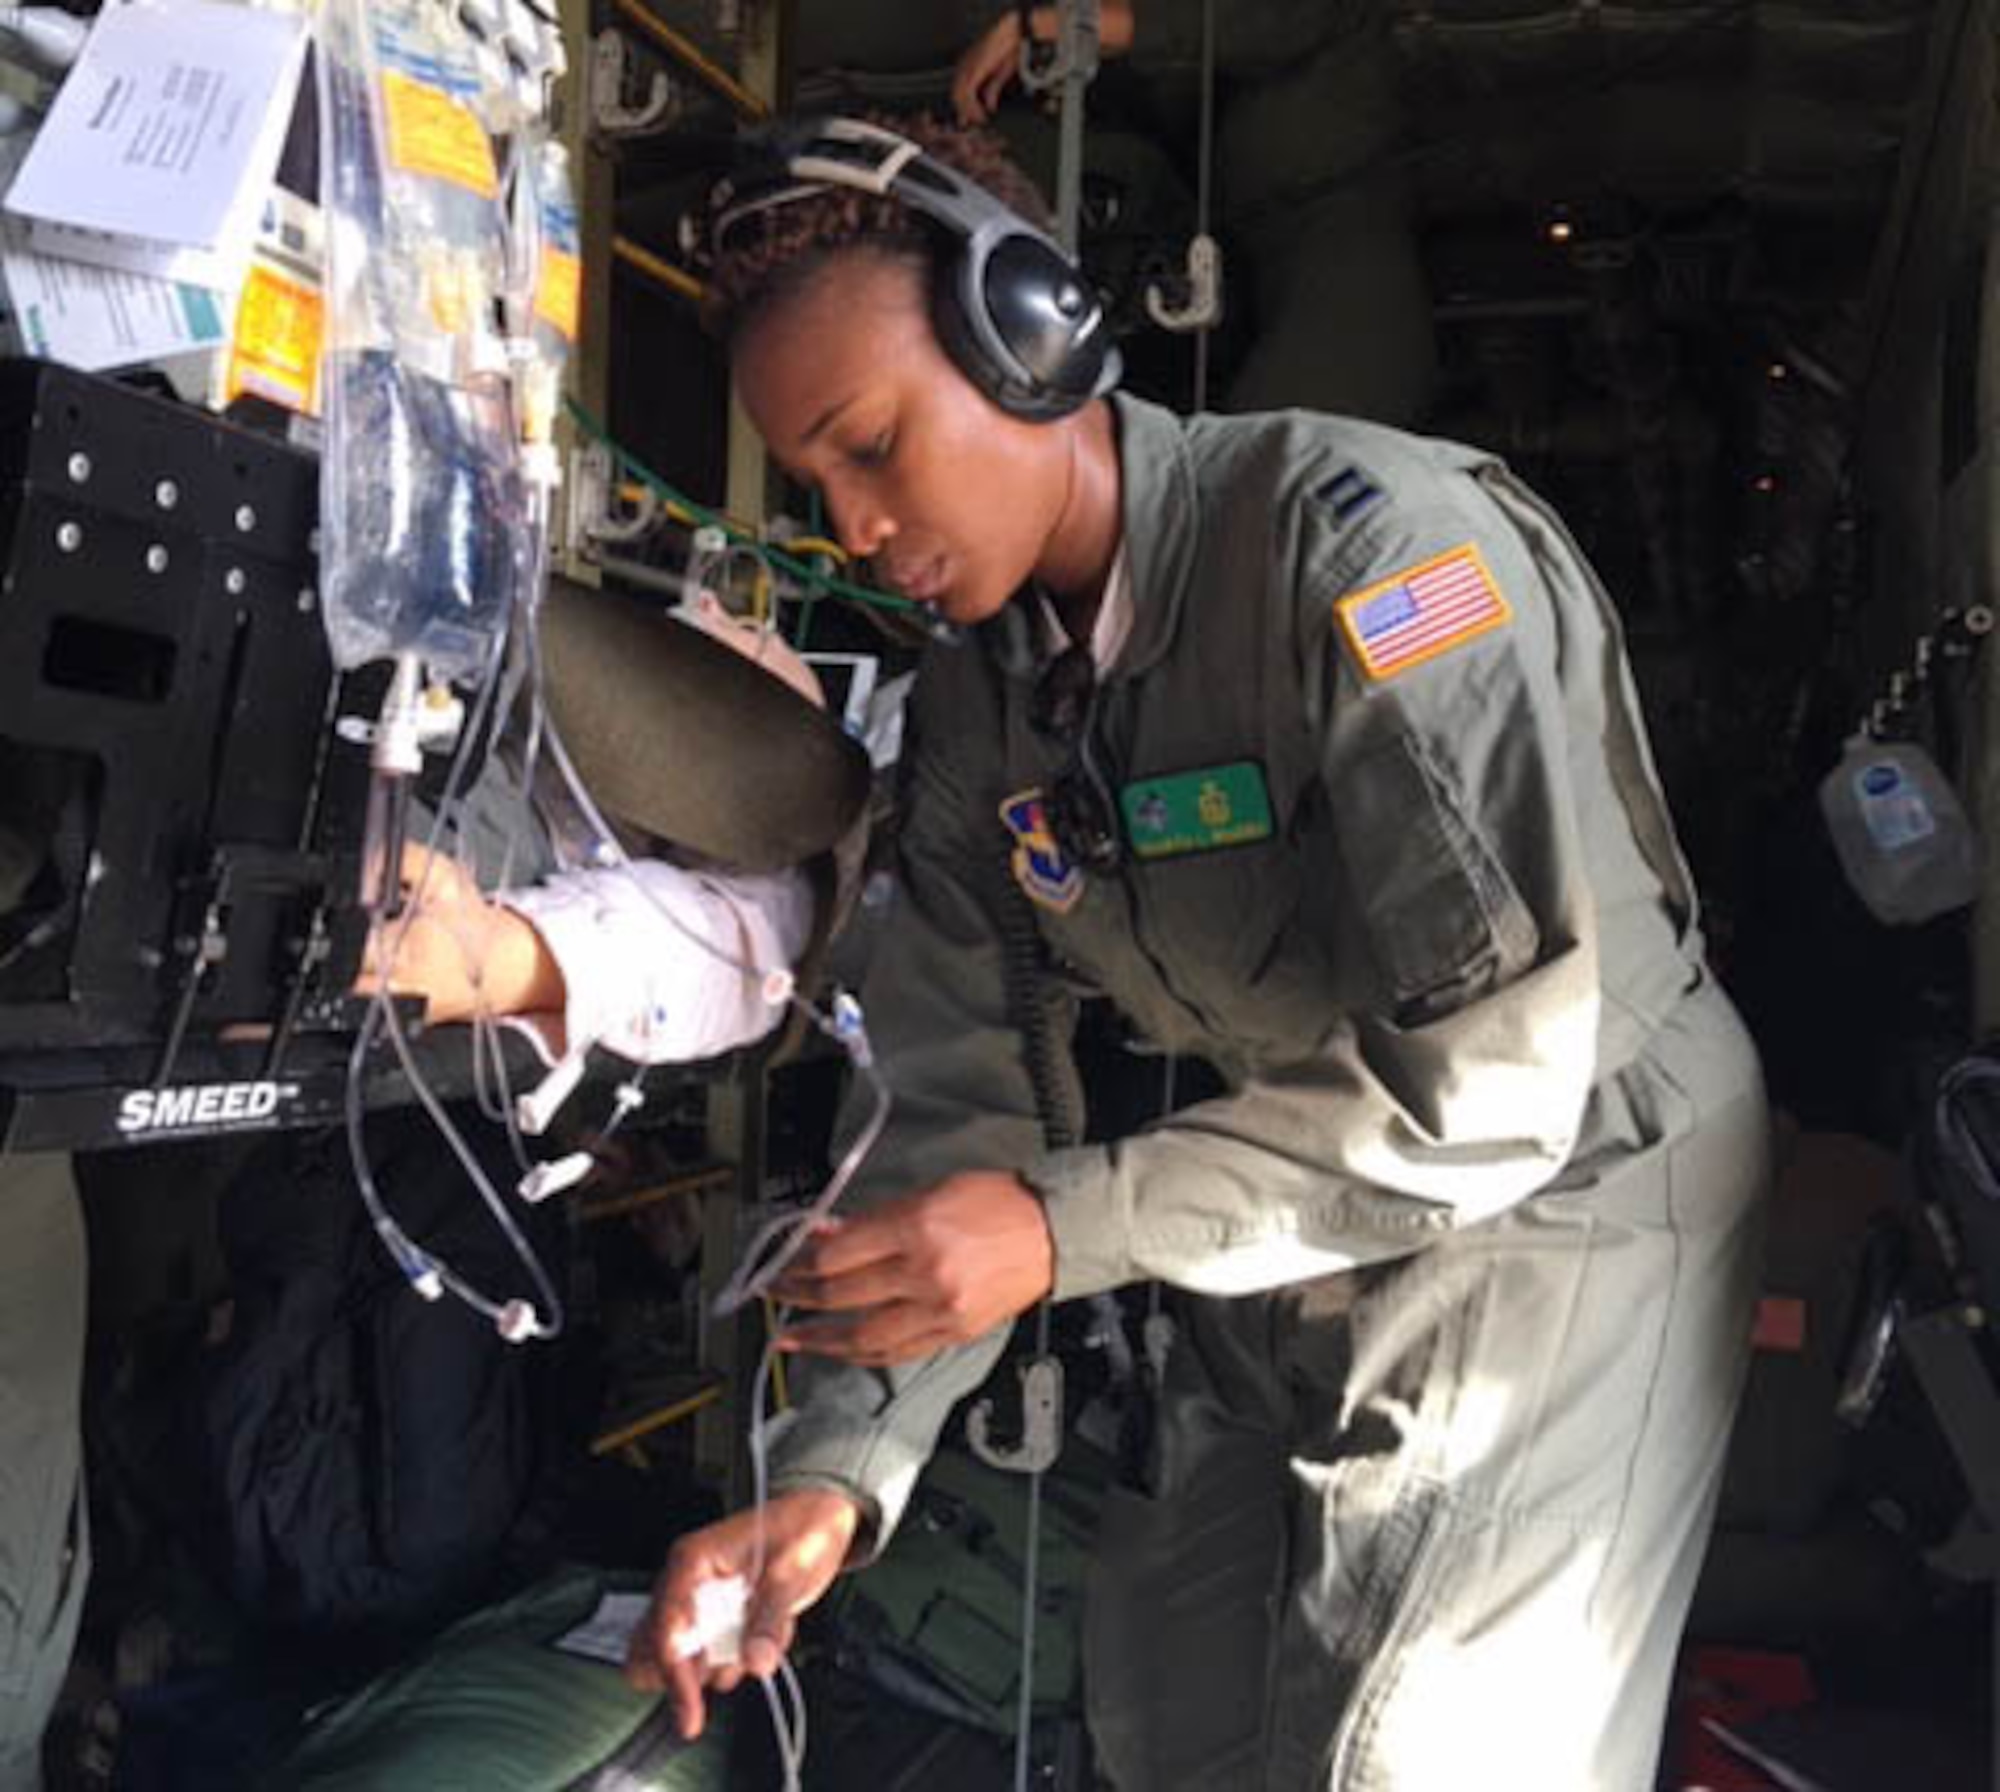 Capt. Sharita Bowers, a registered nurse with the 81st Medical Group's Critical Care Air Transport Team, checks an IV line for a simulated patient during a training exercise March 10, 2019, onboard a C-130J Super Hercules aircraft at Keesler Air Force Base, Miss. The exercise involved the Air Force Reseve Airmen of the 403rd Wing's 36th Aeromedical Evacuation Squadron and the 815th Airlift Squadron and active duty Air Force service members of the 81st Medical Group's CCATT. All three military units are at Keesler Air Force Base, Miss. (U.S. Air Force Photo by Lt. Col. Ryan Mihata)